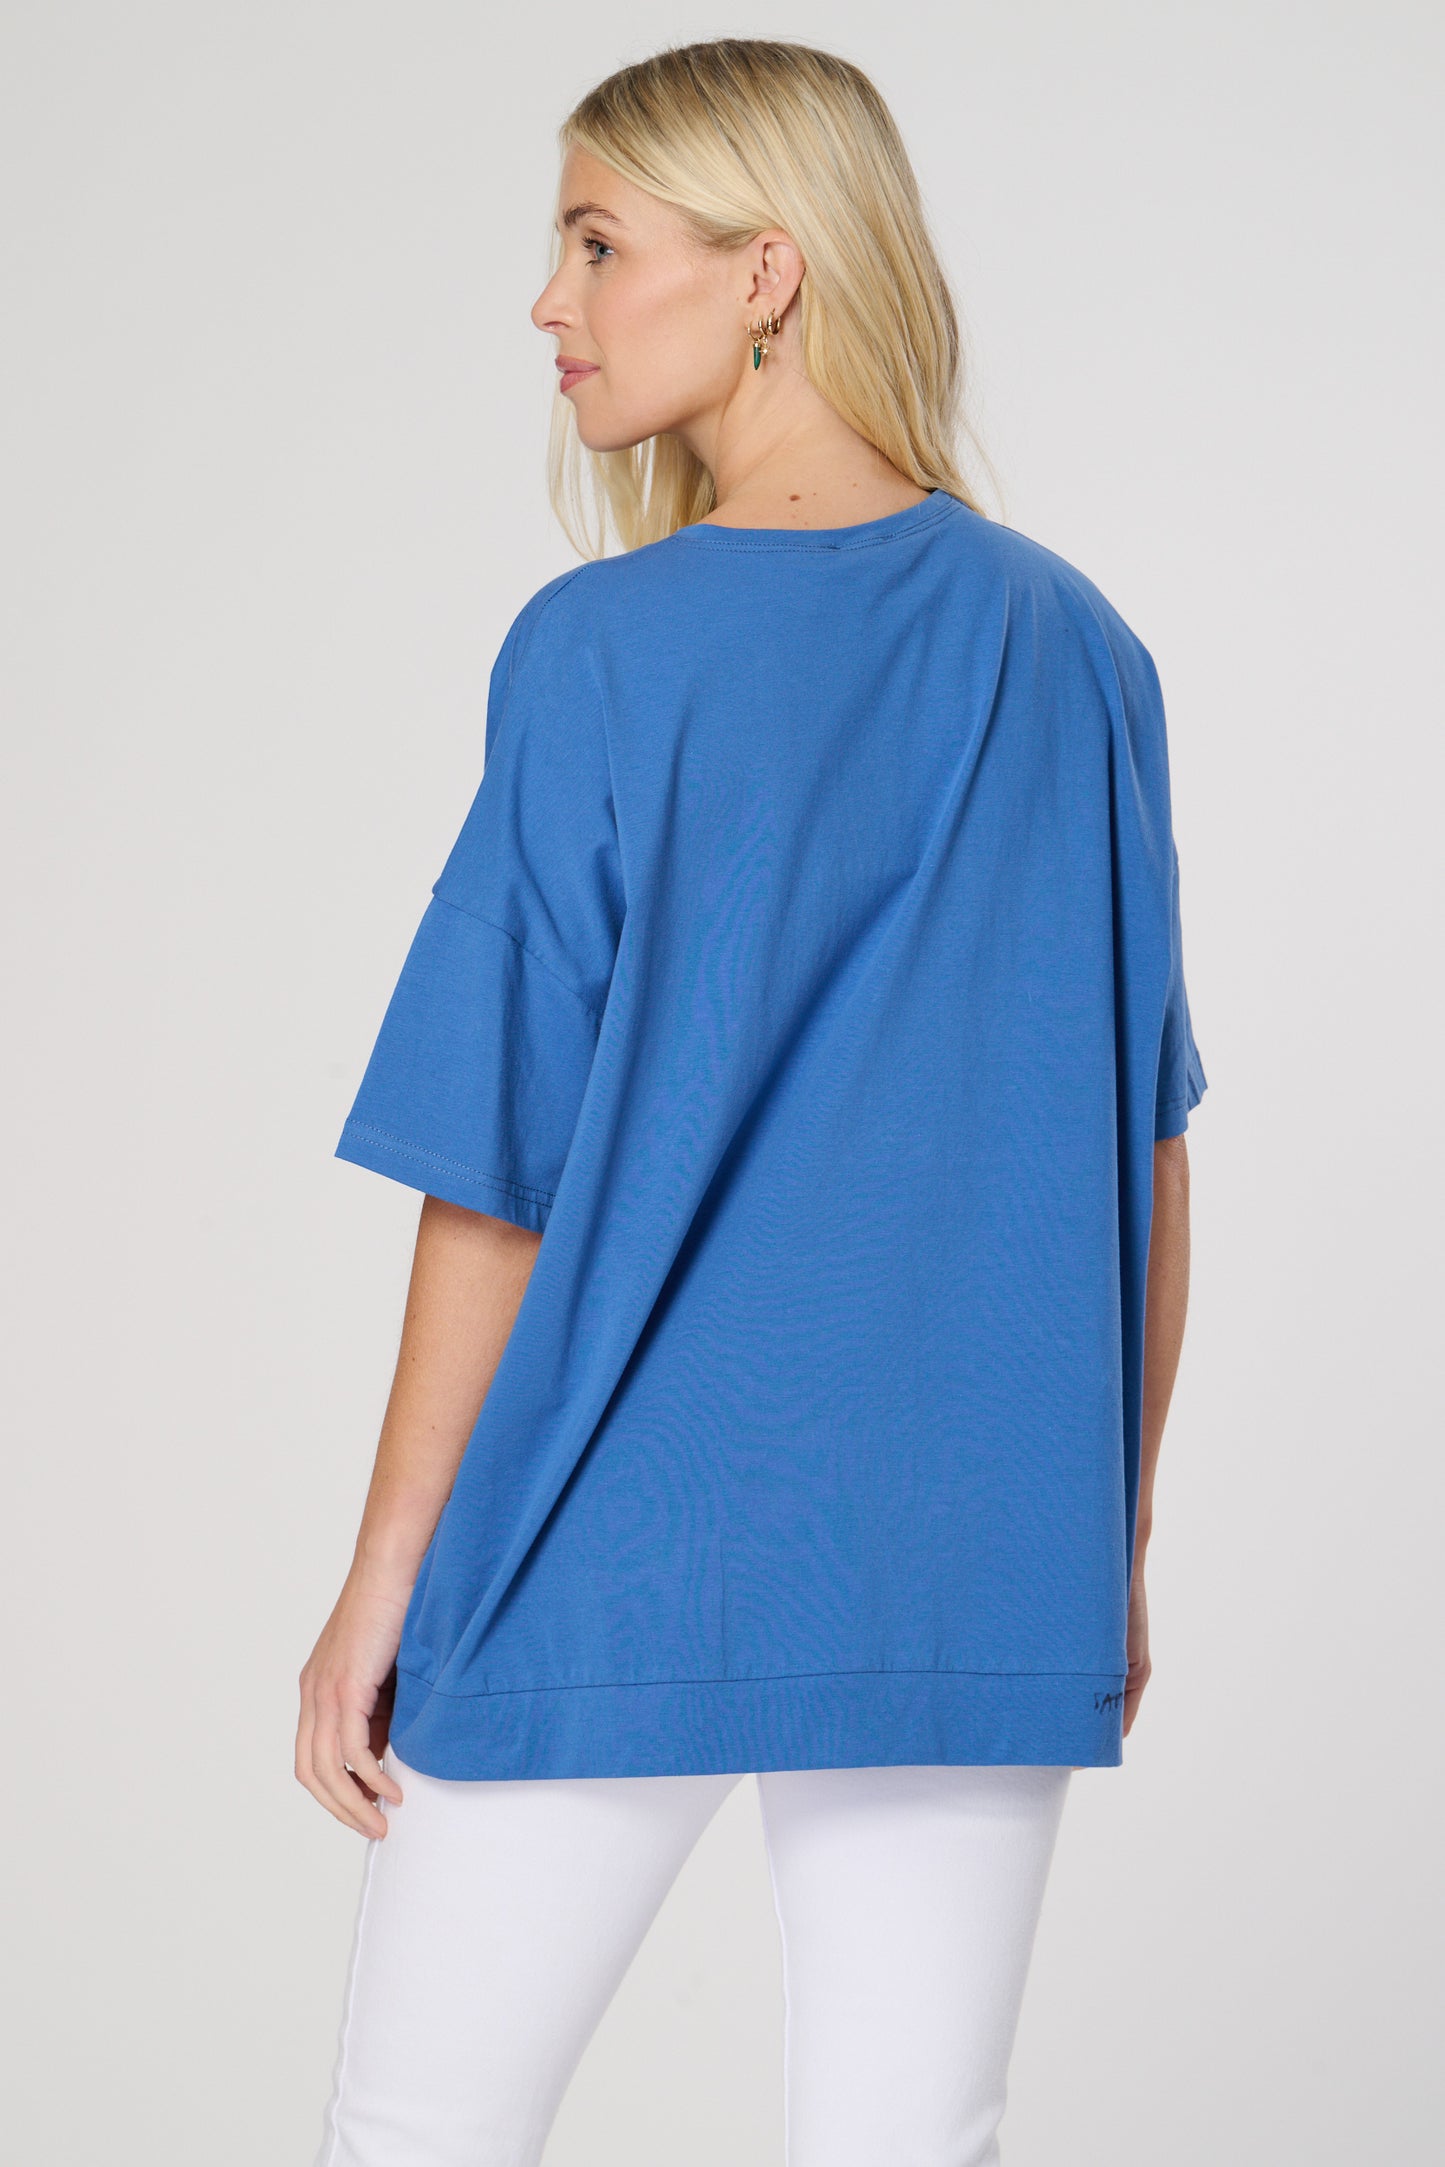 7557-A Oversized short sleeved top with zip pockets (Bundle of 7pcs) Pre-Order